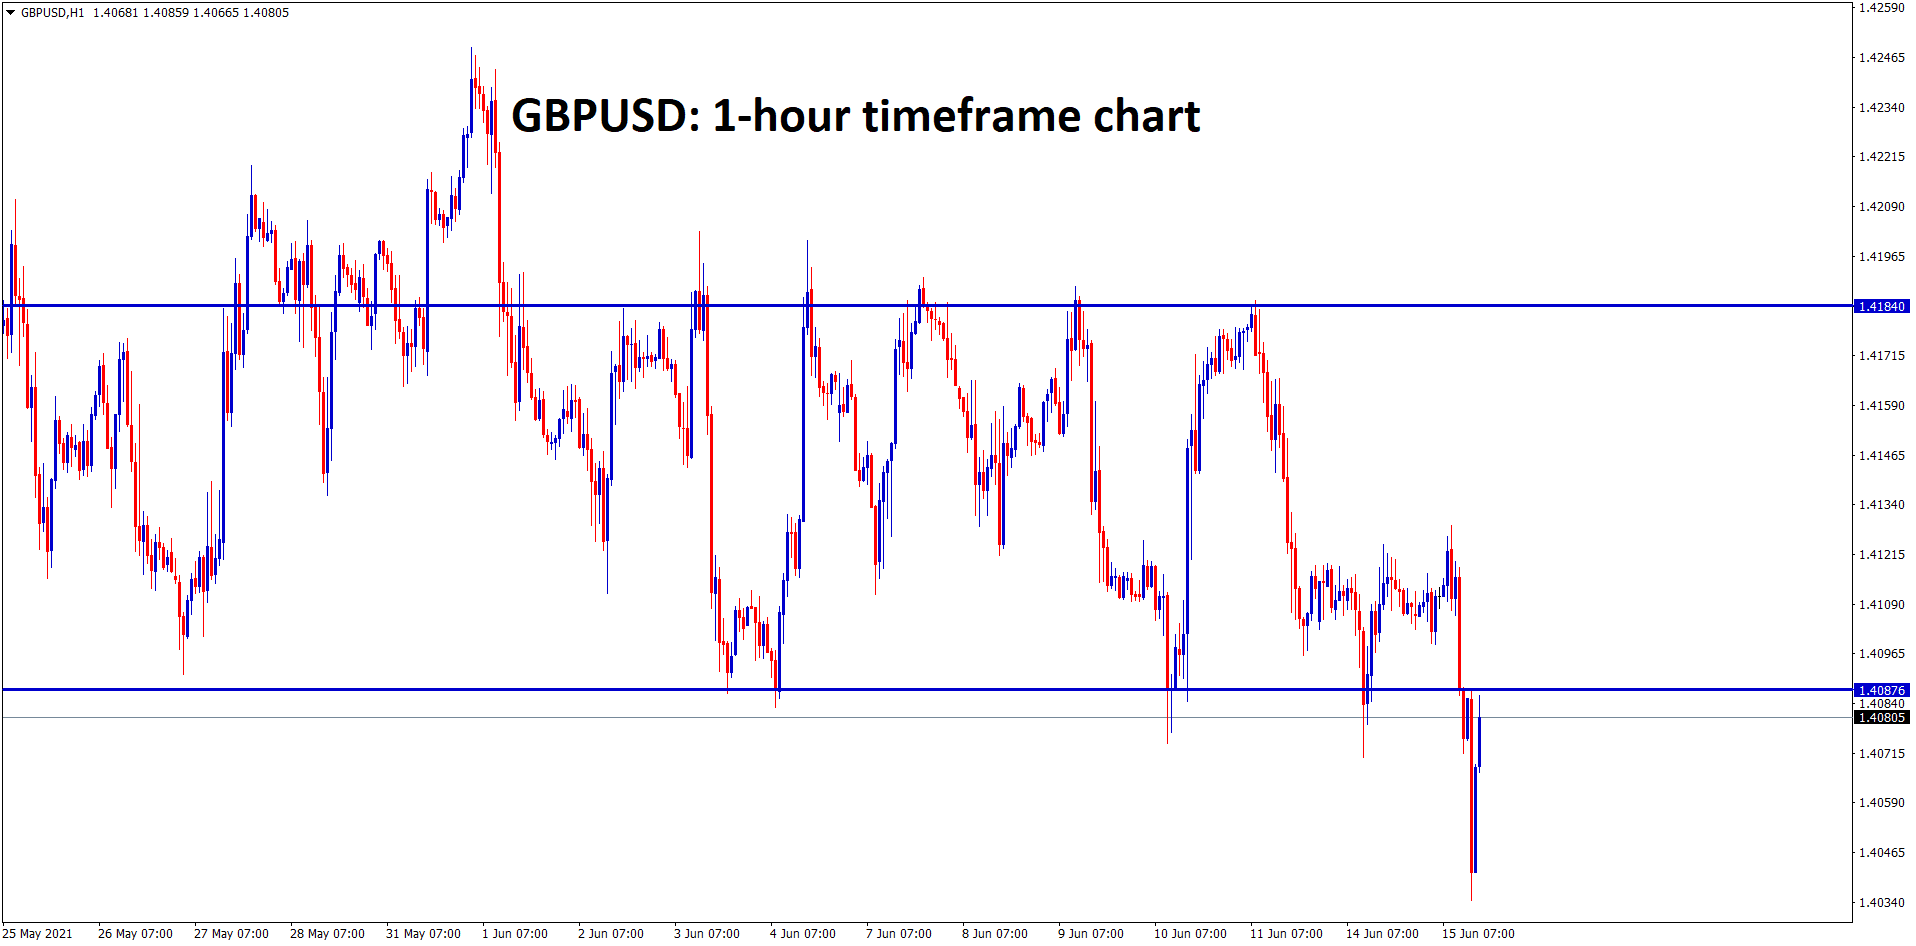 GBPUSD broken the bottom level of the range however market has bounced back harder to the retest zone